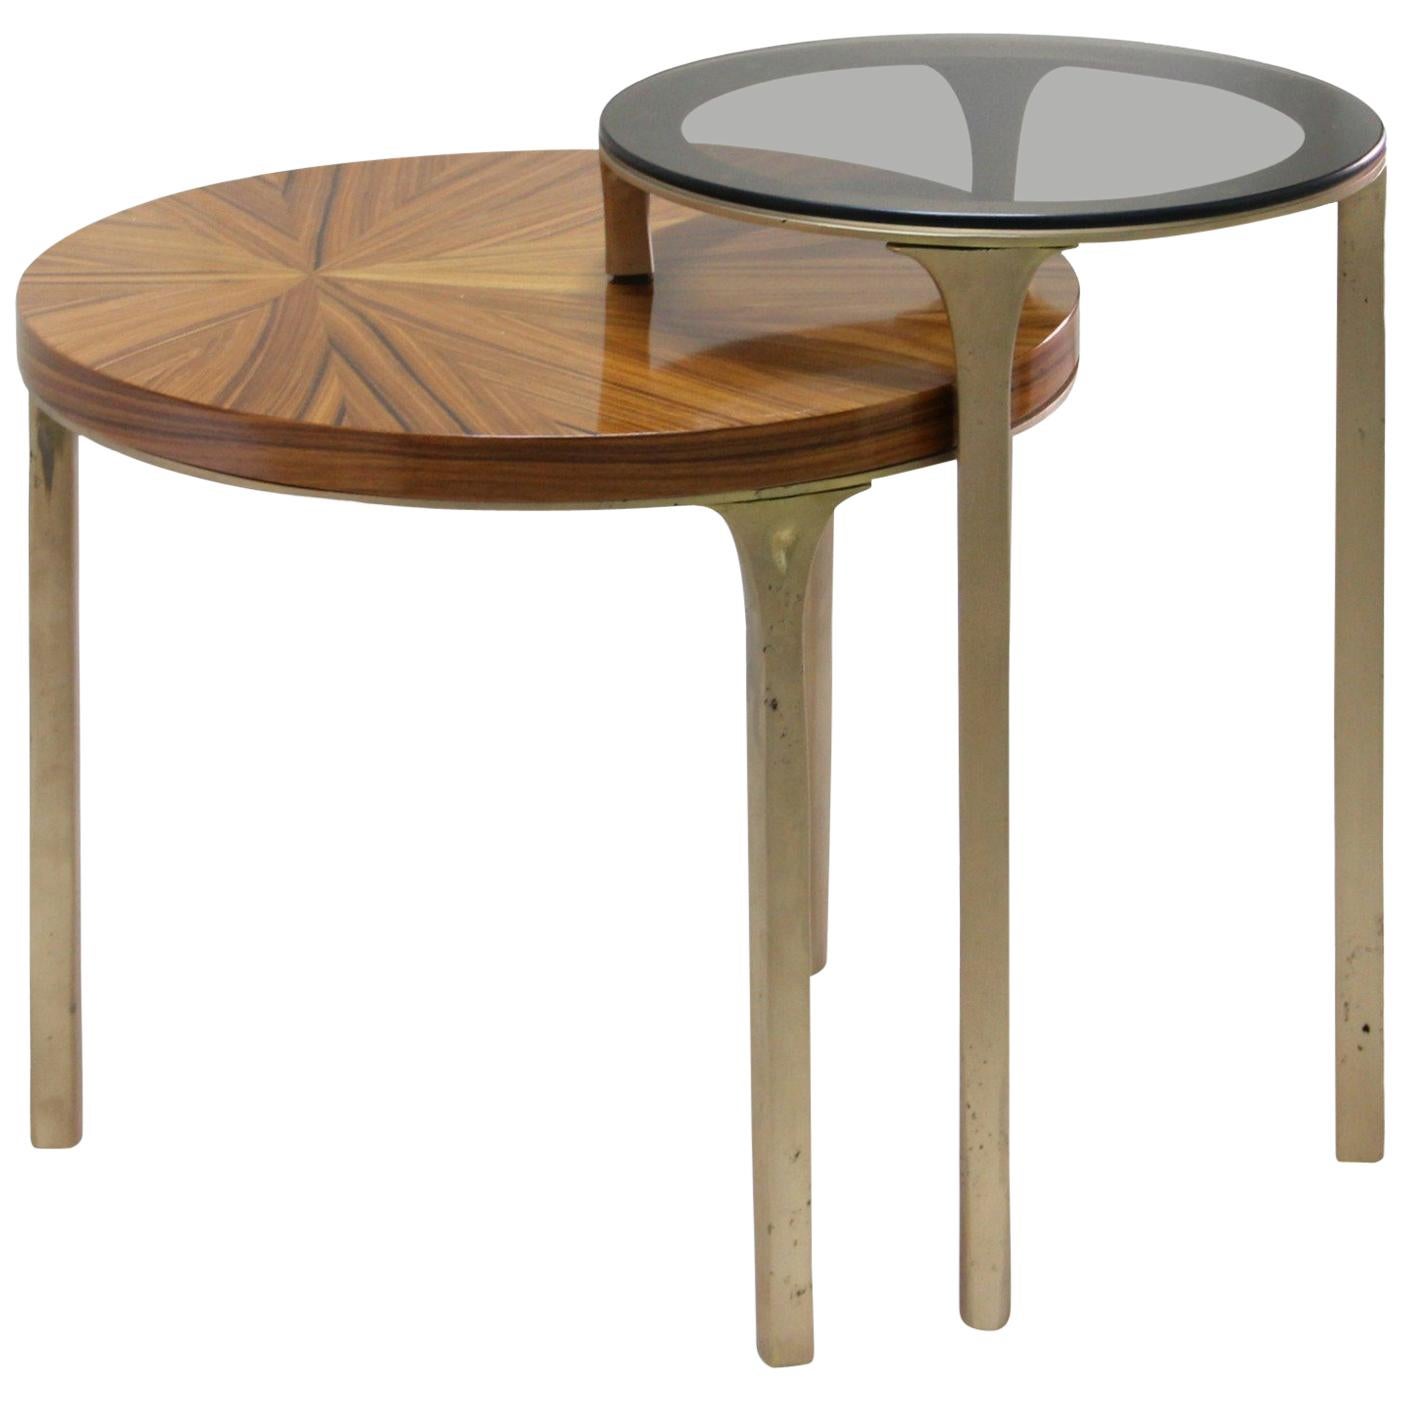 Luray Side Table with Wood and Glass Tops